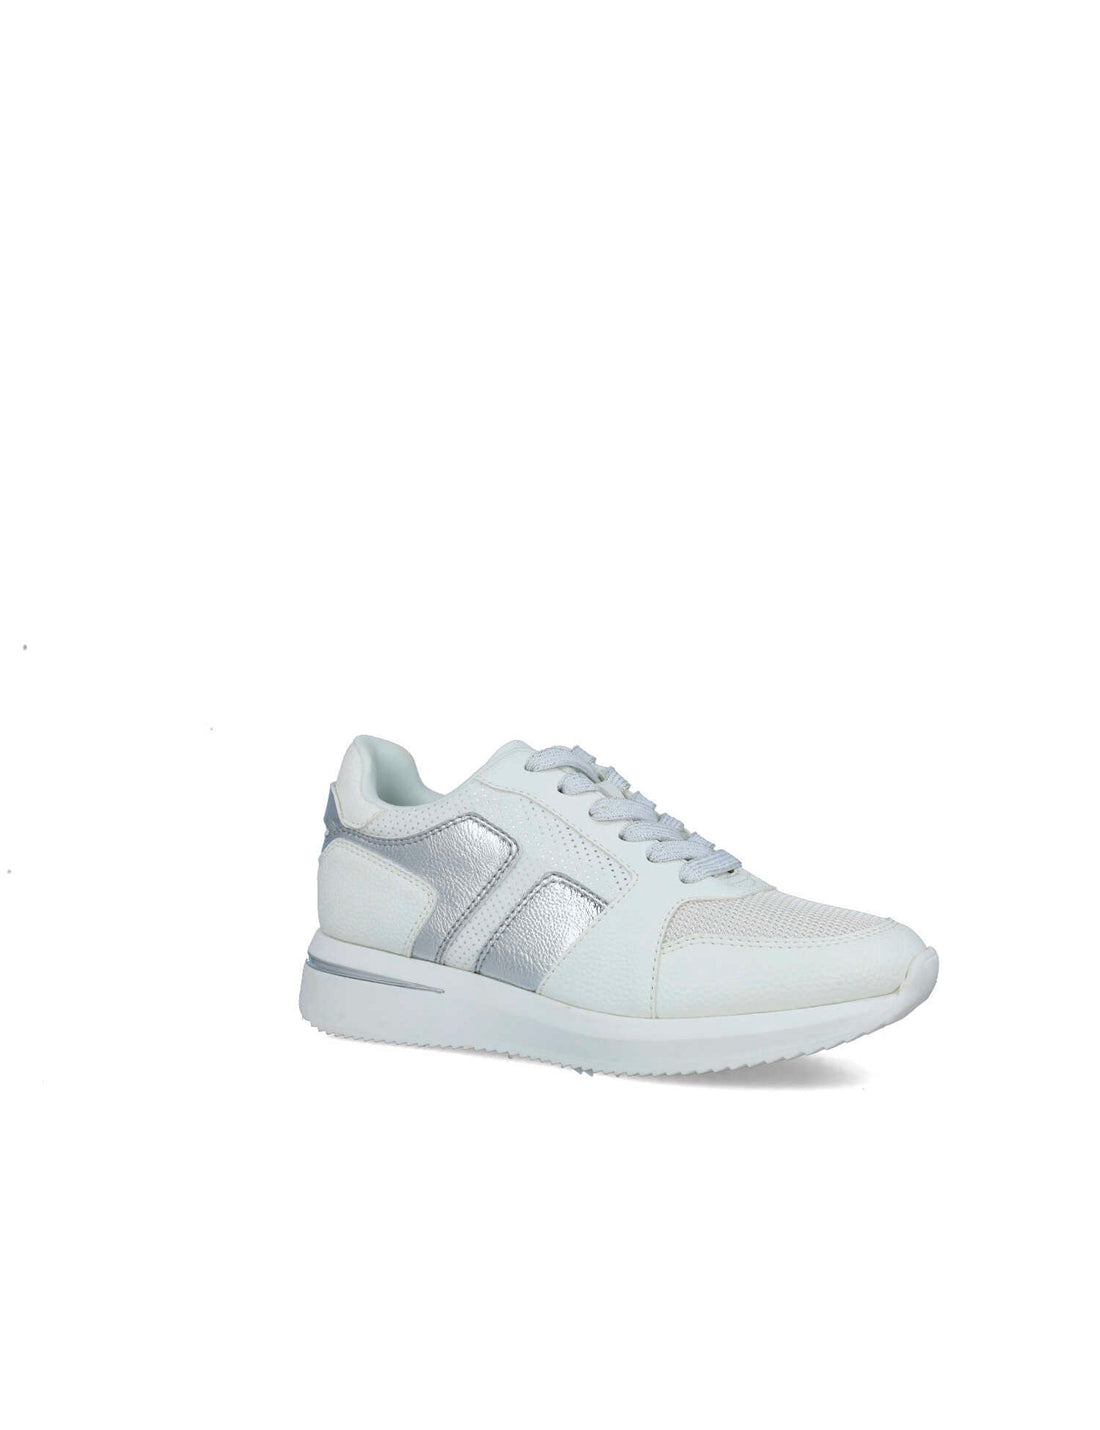 White Trainers With Silver Details_25611_09_02